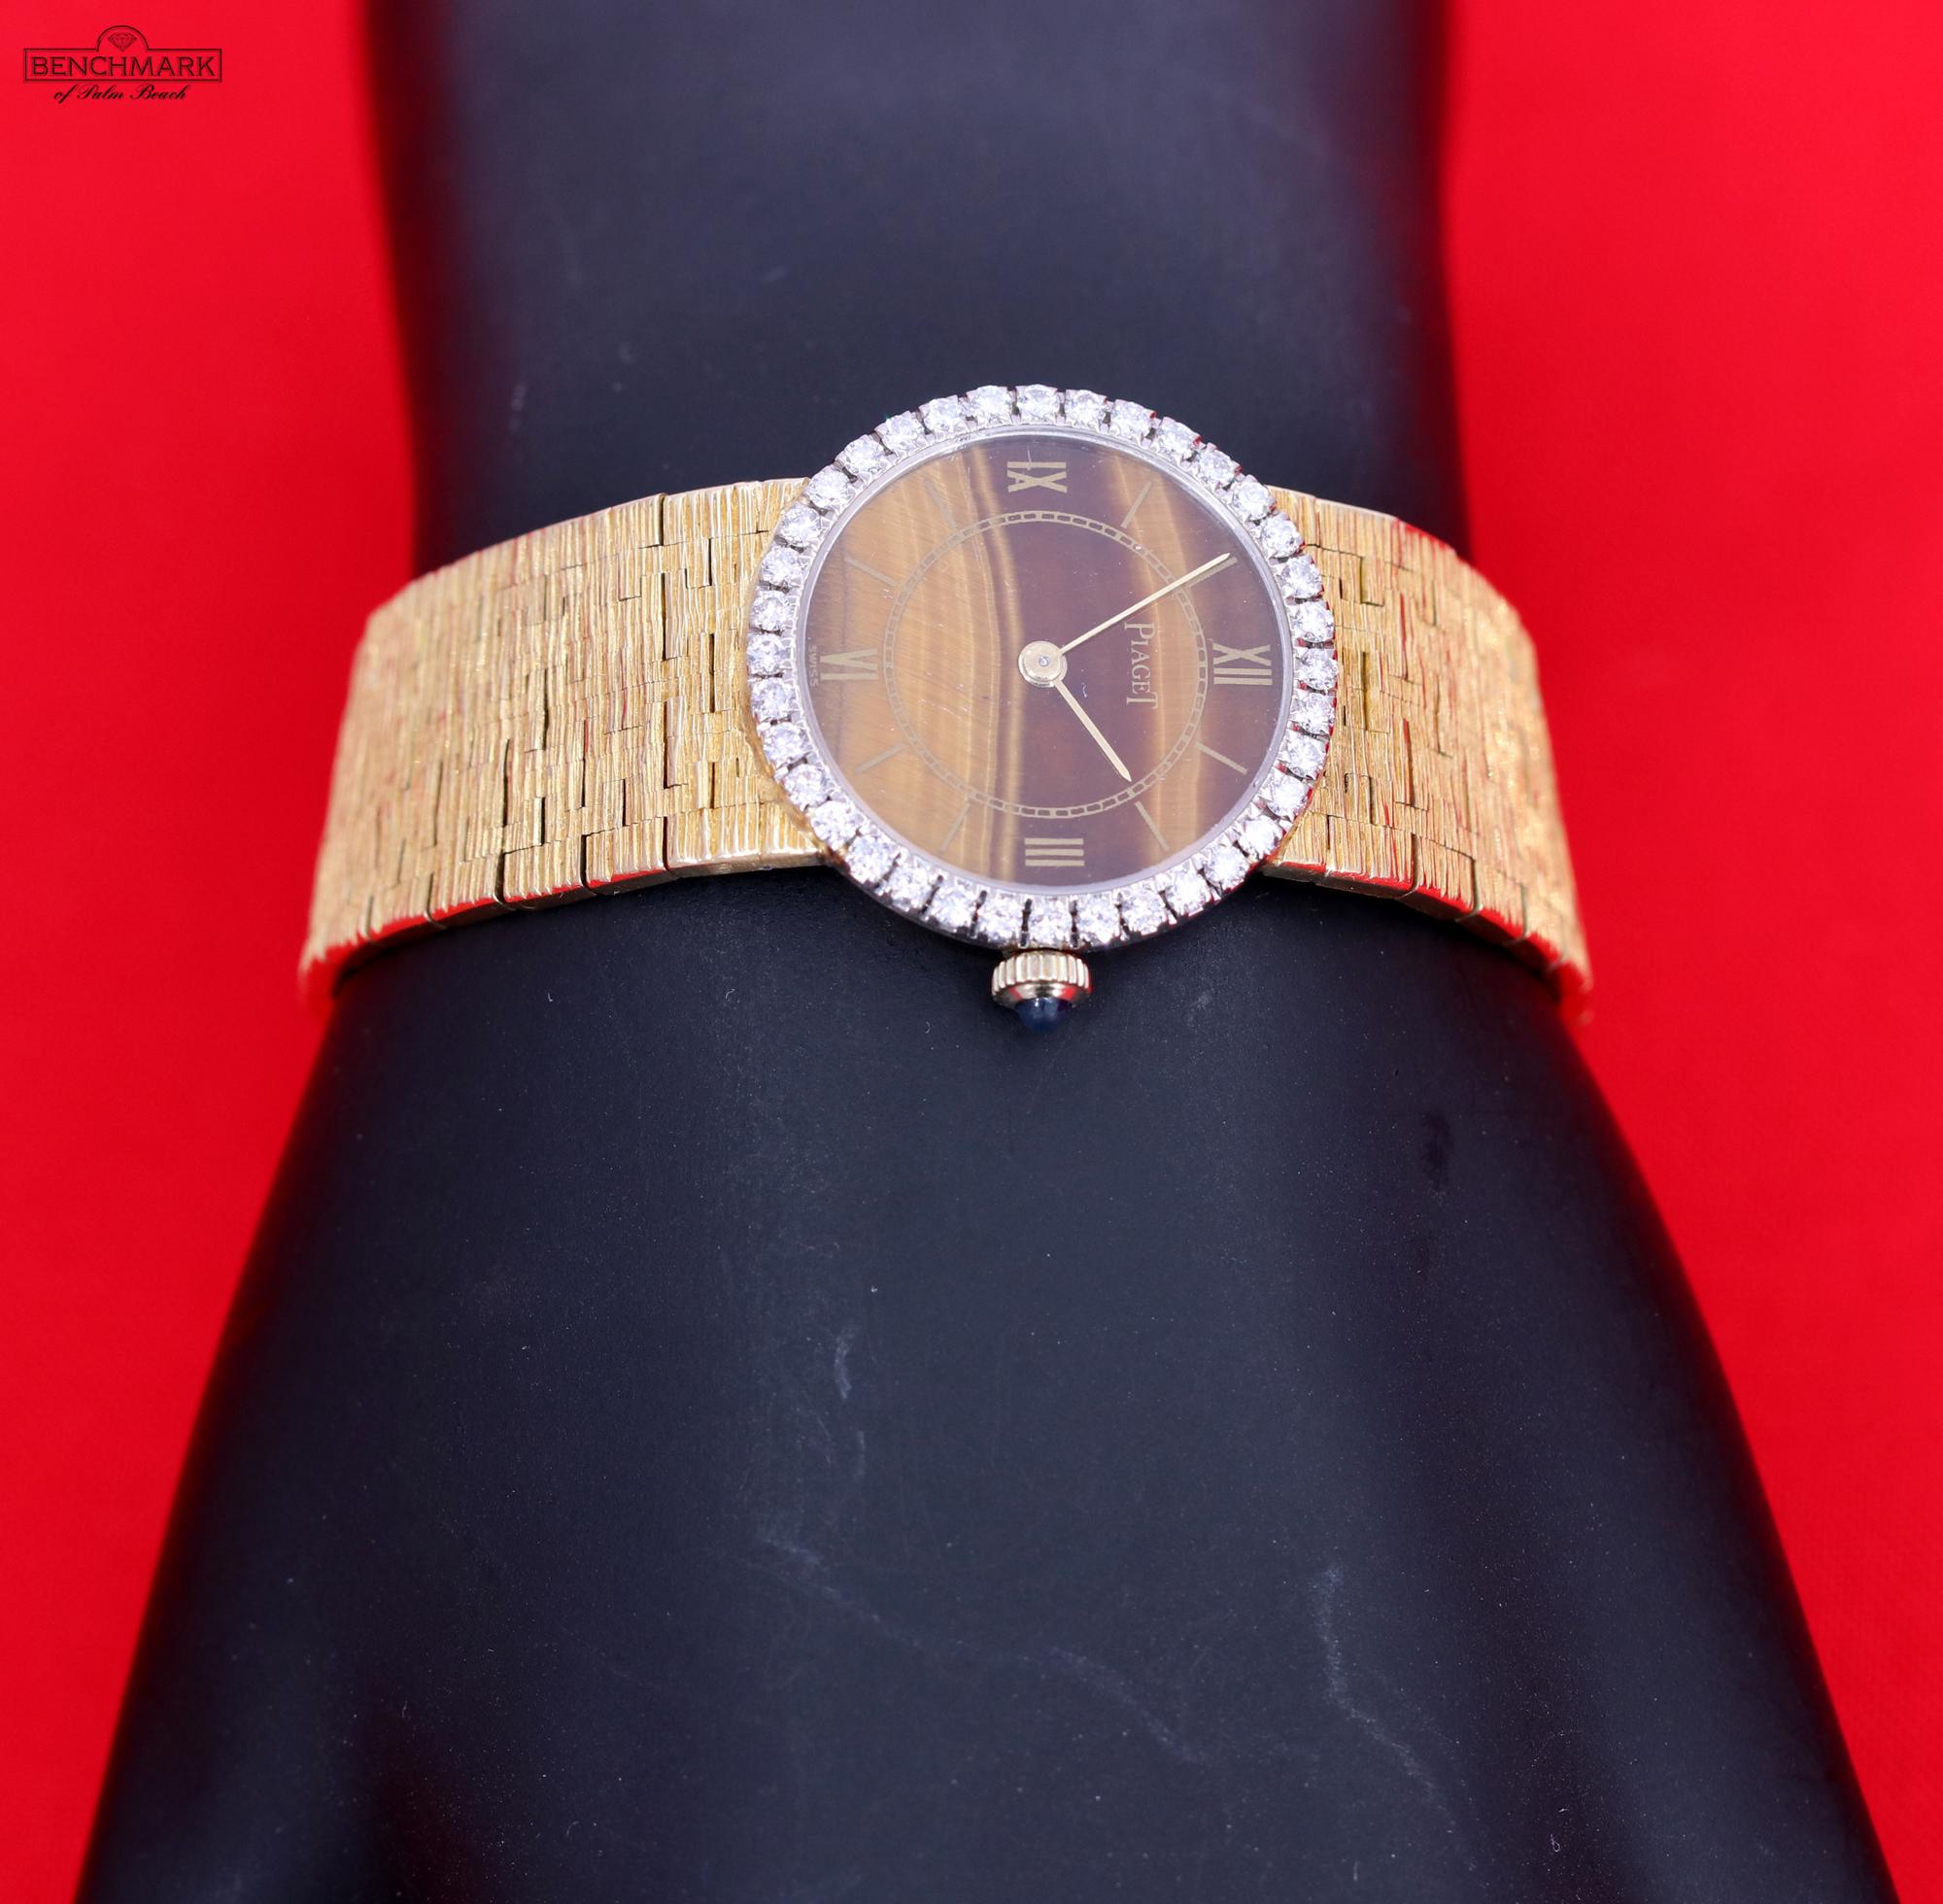 An 18K yellow gold Piaget watch centered around a tiger's eye dial with gold Roman numerals. Around the case is a white gold bezel set with 34 round brilliant cut diamonds weighing approximately 0.85ct of overall F/G color and VVS1/VVS2 clarity.